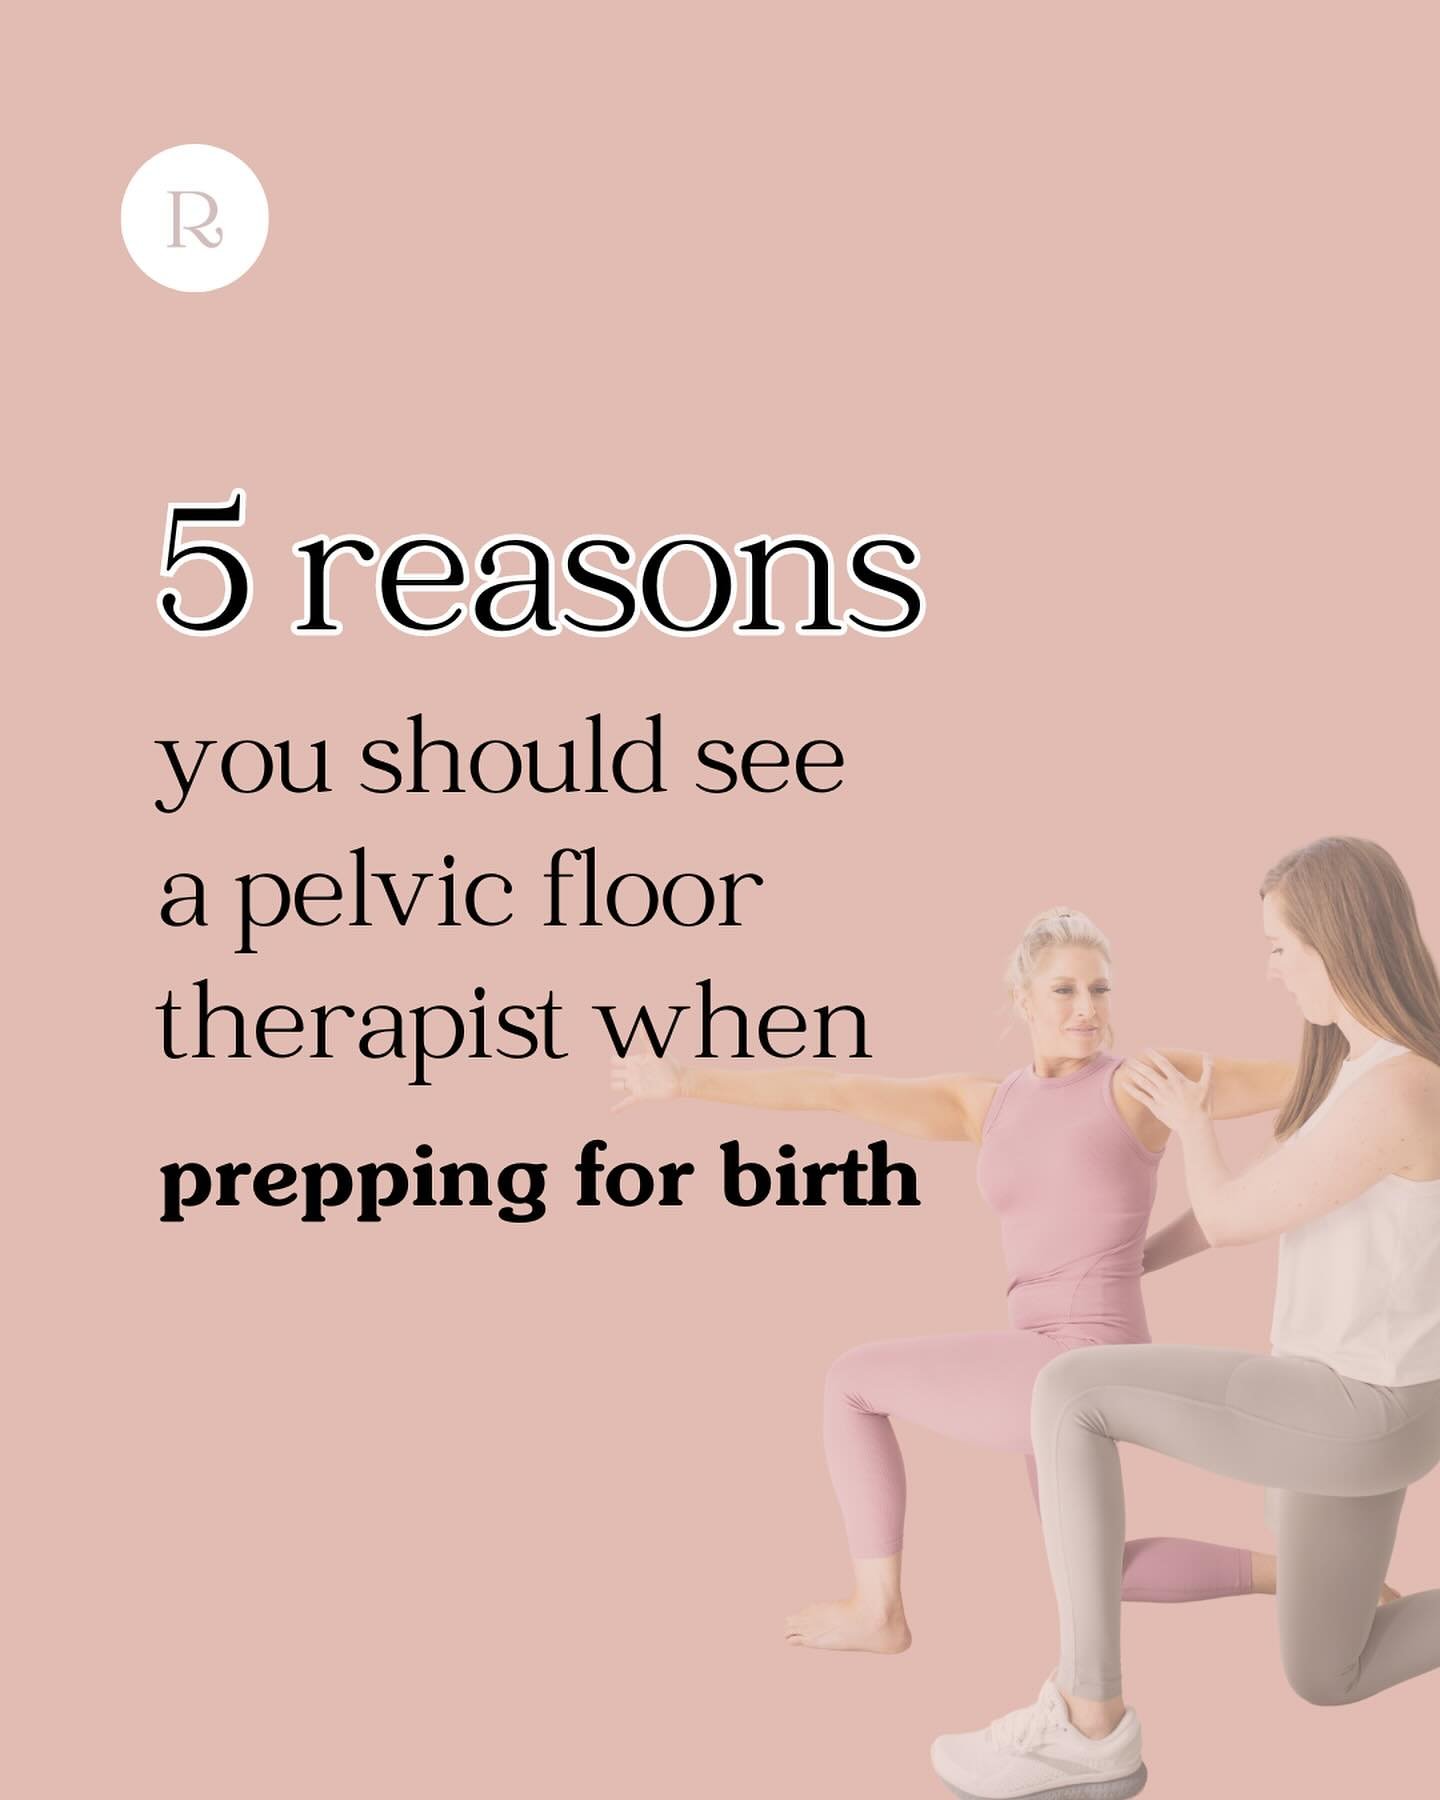 Preparing for childbirth? 🤰✨ SAVE THIS POST!

Understanding the role of pelvic floor therapy can significantly enhance your birthing experience🙌🏼

If you&rsquo;re considering adding a pelvic health specialist to your team, here&rsquo;s what you ne